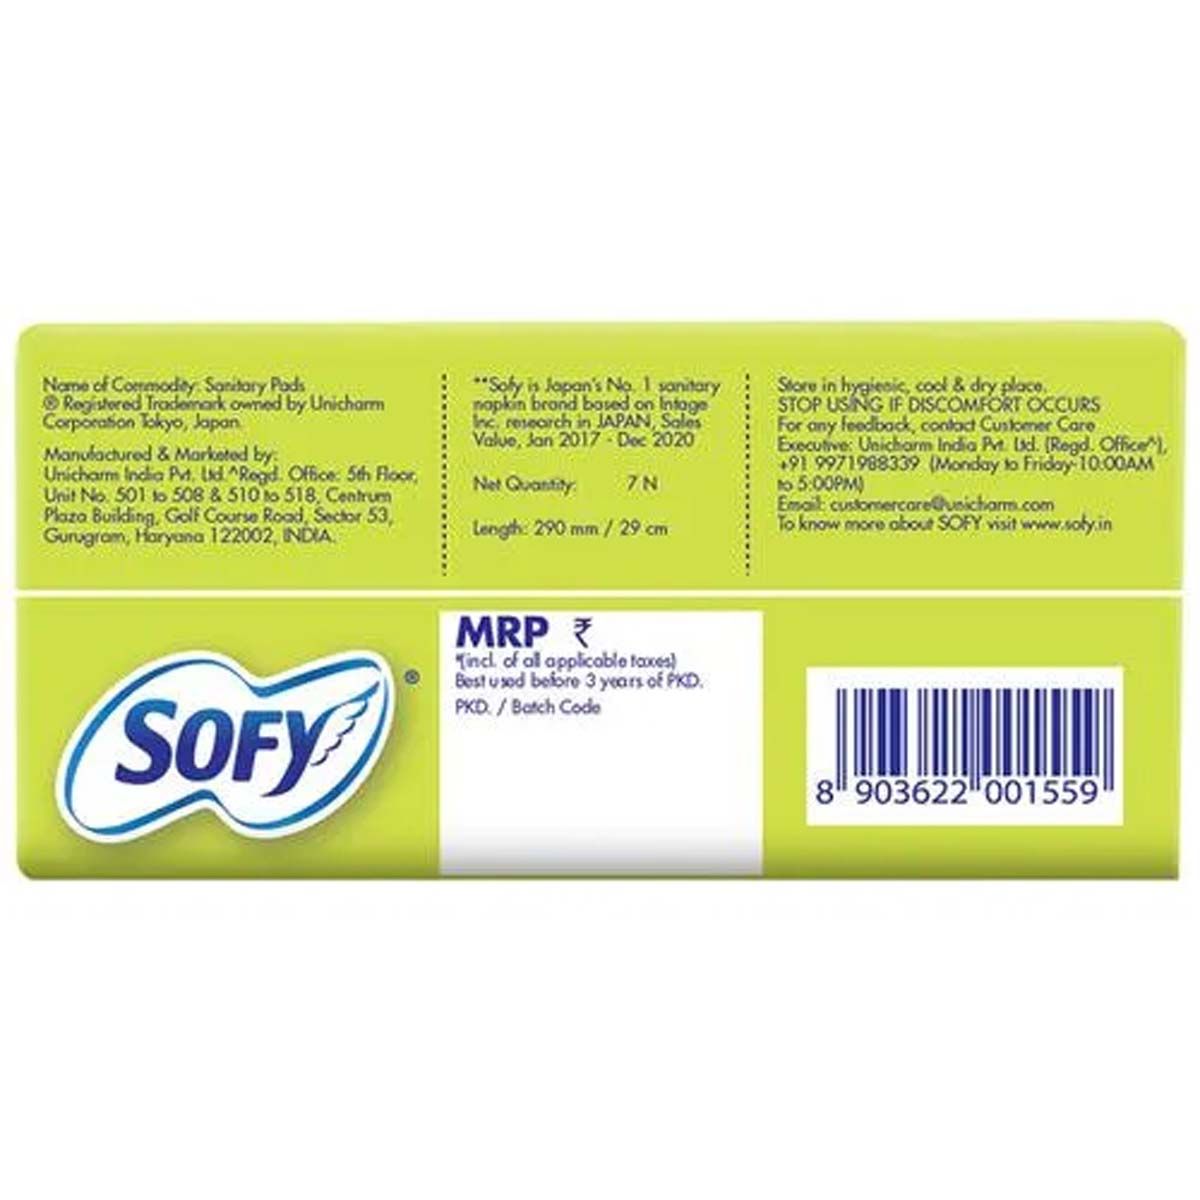 Sofy Bodyfit Antibacteria Pads Extra Long, 7 Count, Pack of 1 